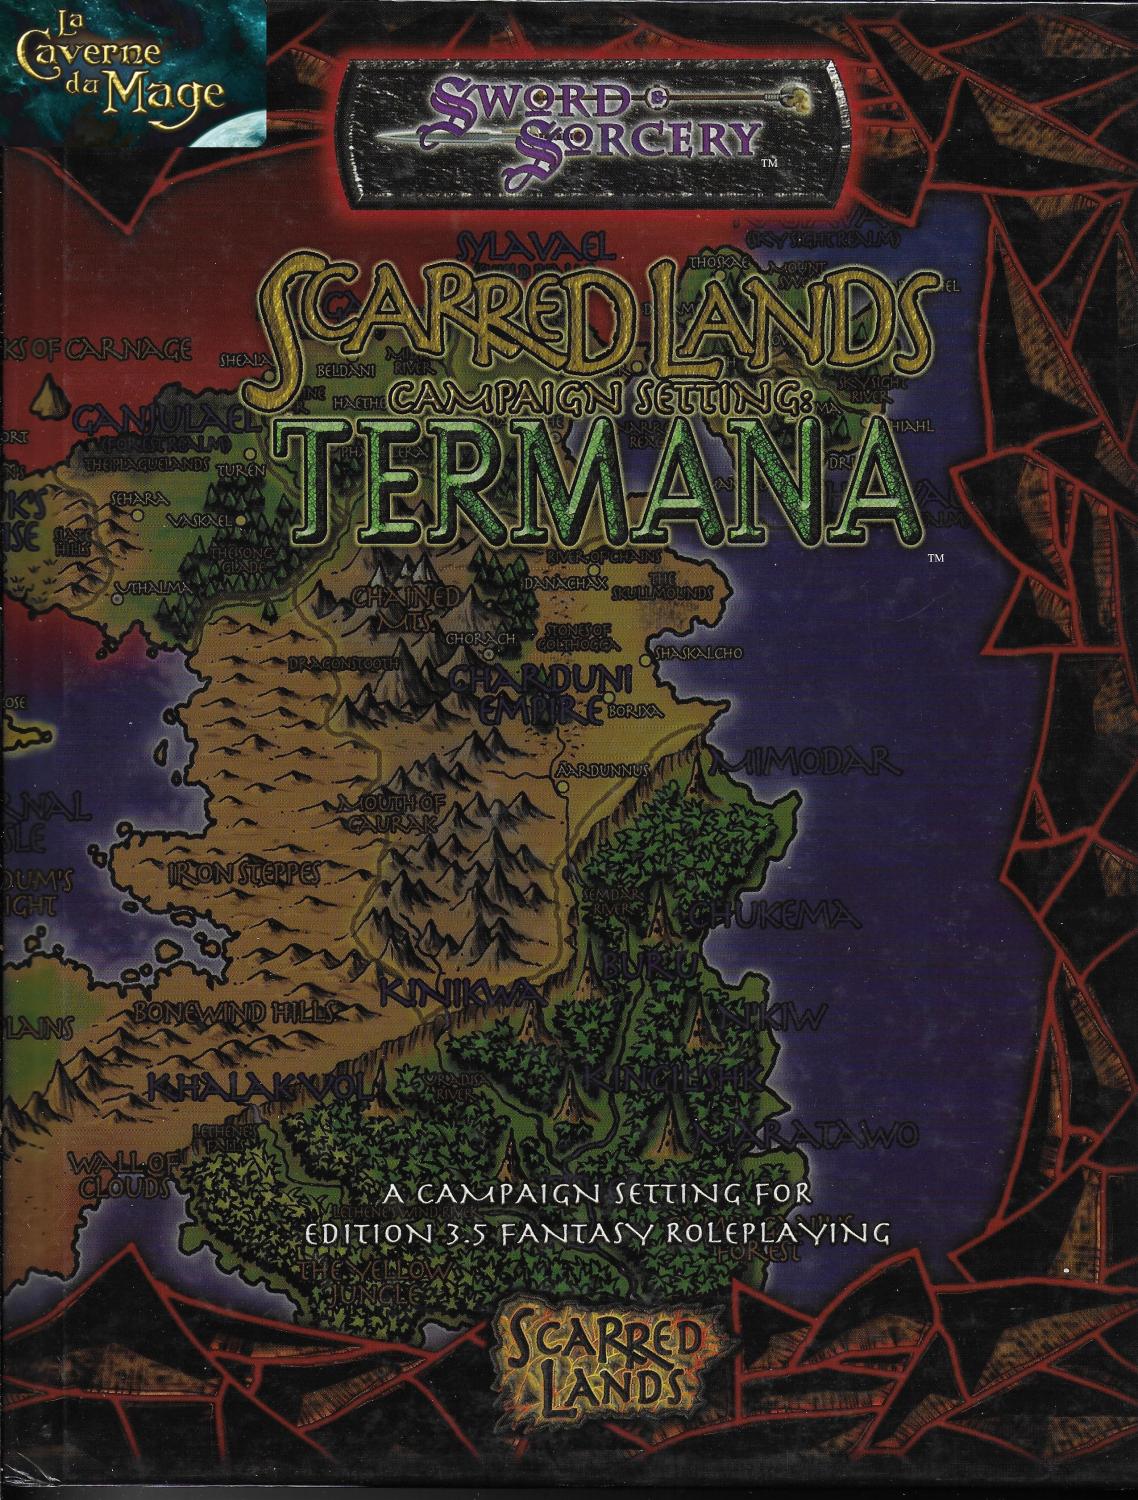 SCARRED LANDS - Campaign Setting Termana